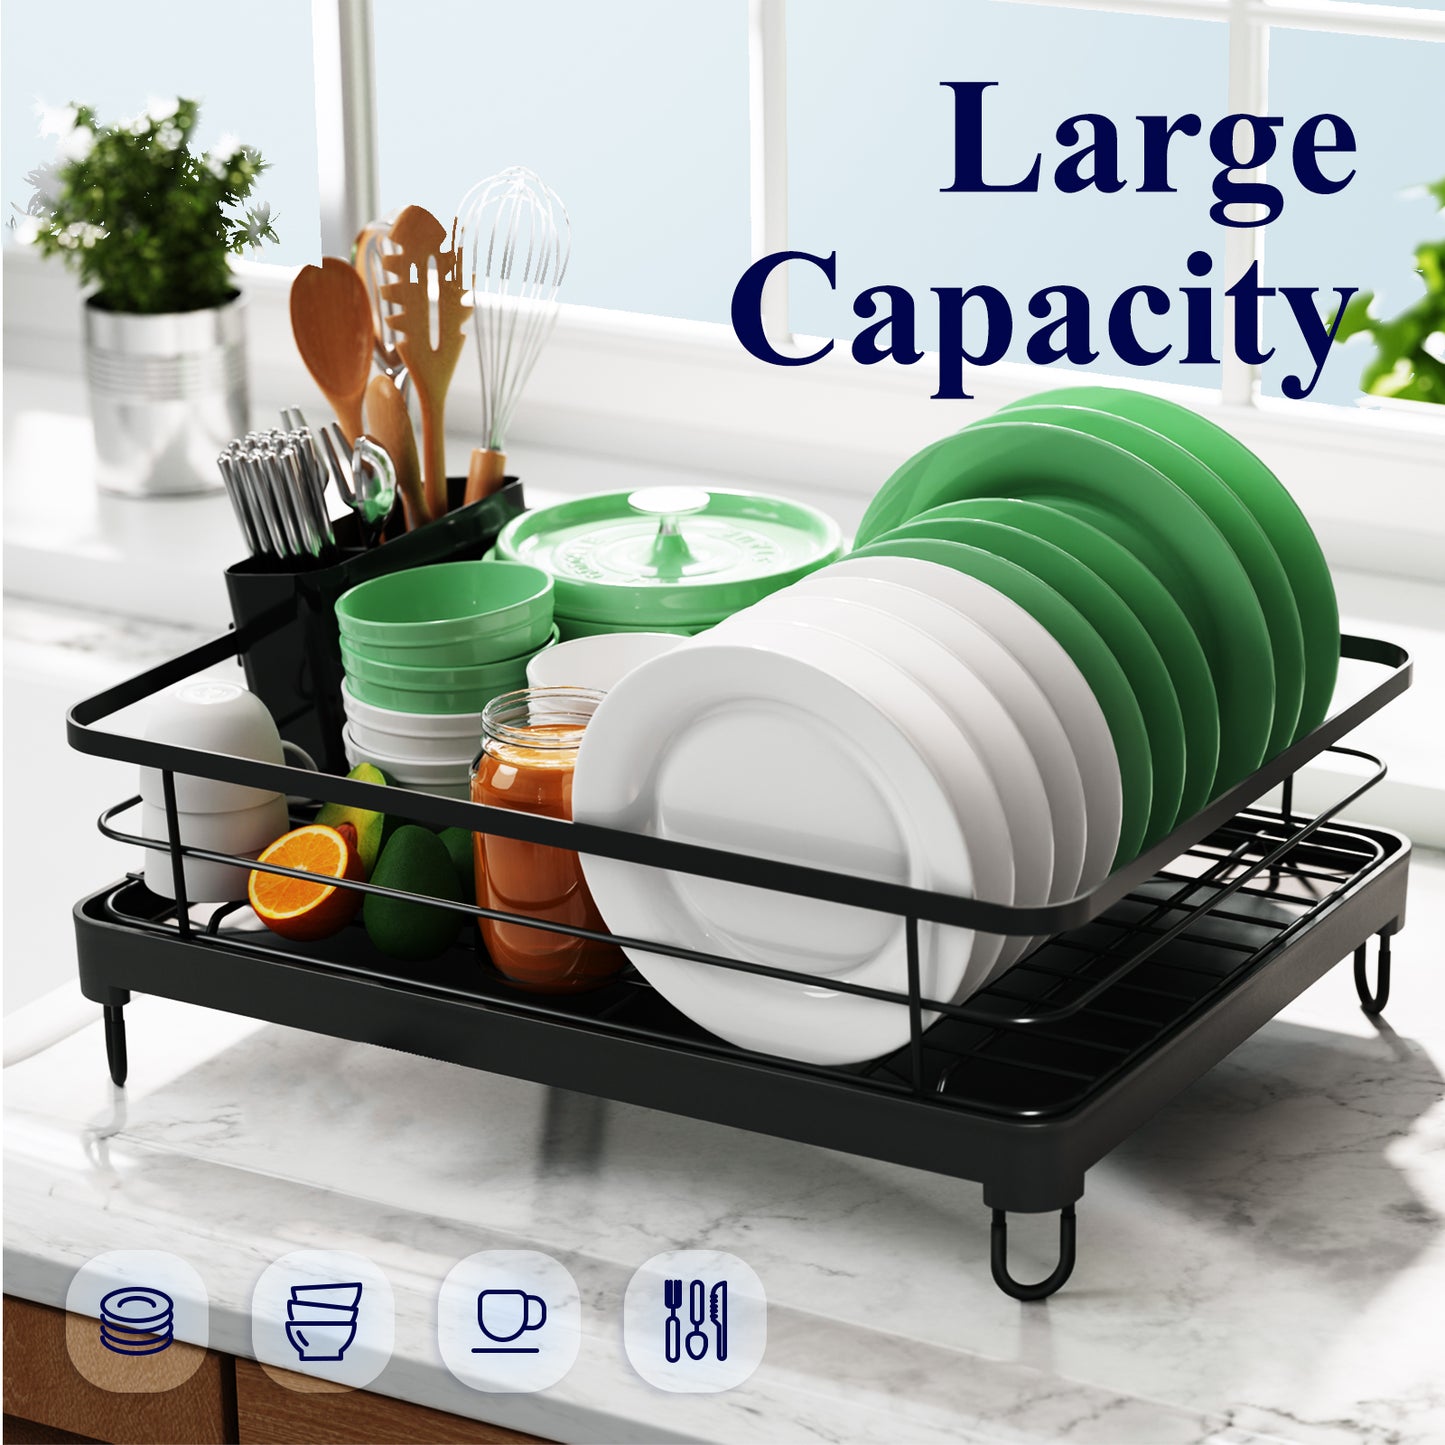  Kitsure Dish Drying Rack- Space-Saving, for Kitchen Counter,  Durable Stainless Steel Rack with a Cutlery Holder, for Dishes, Knives,  Spoons, and Forks